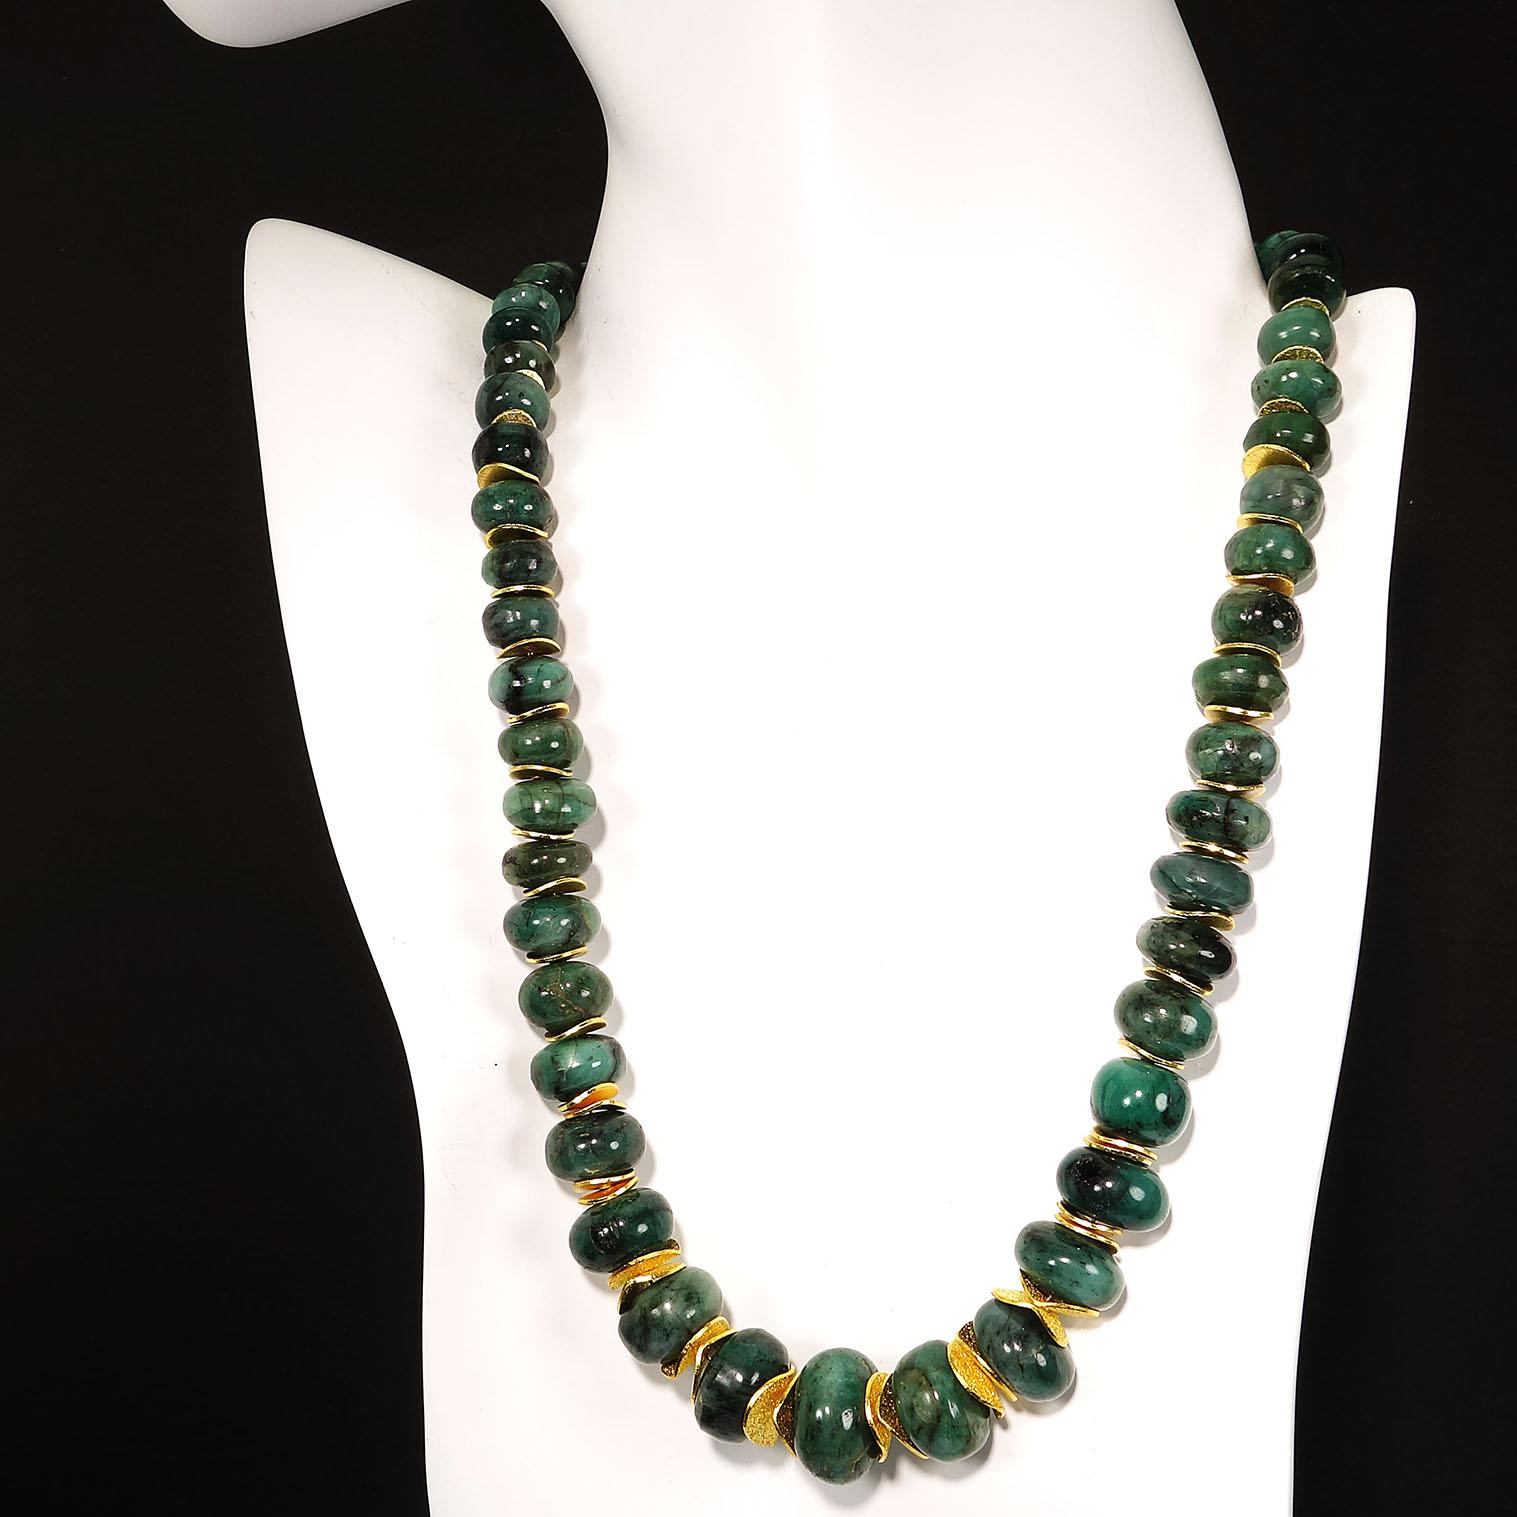  Necklace of Highly Polished Graduated  Green Emerald Rondels with Gold Accents 4